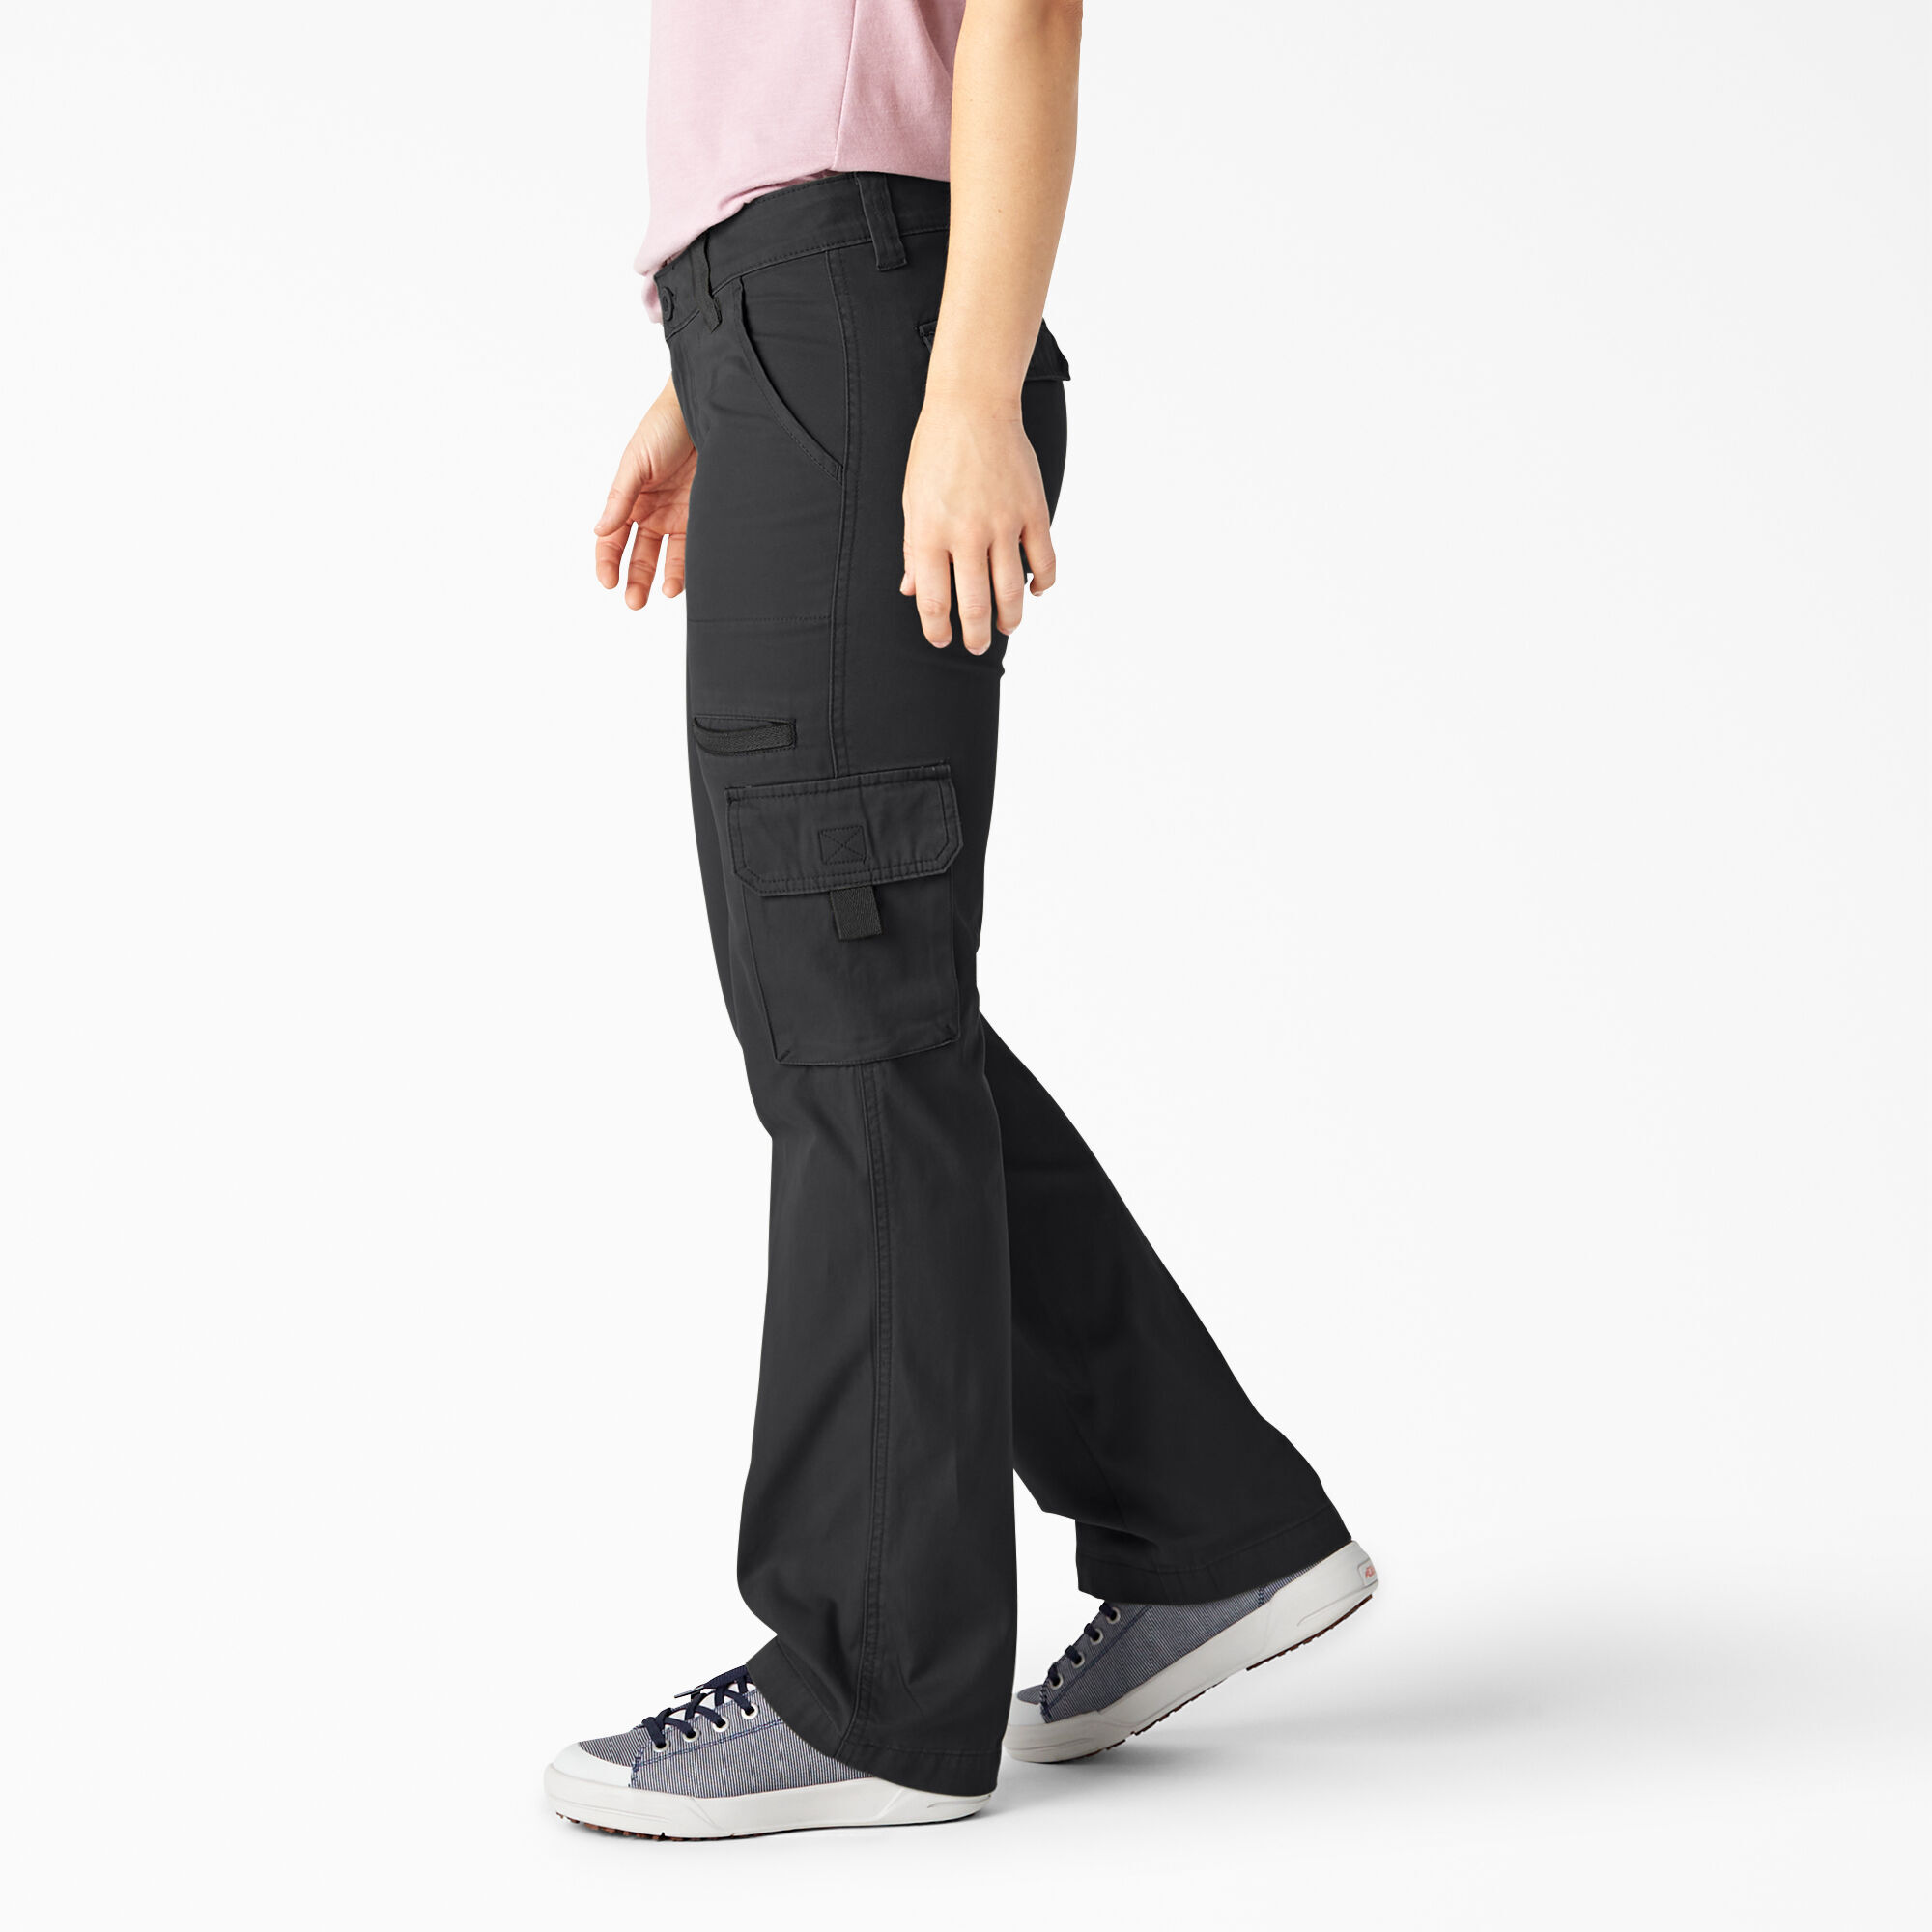 women's cargo pants with lots of pockets